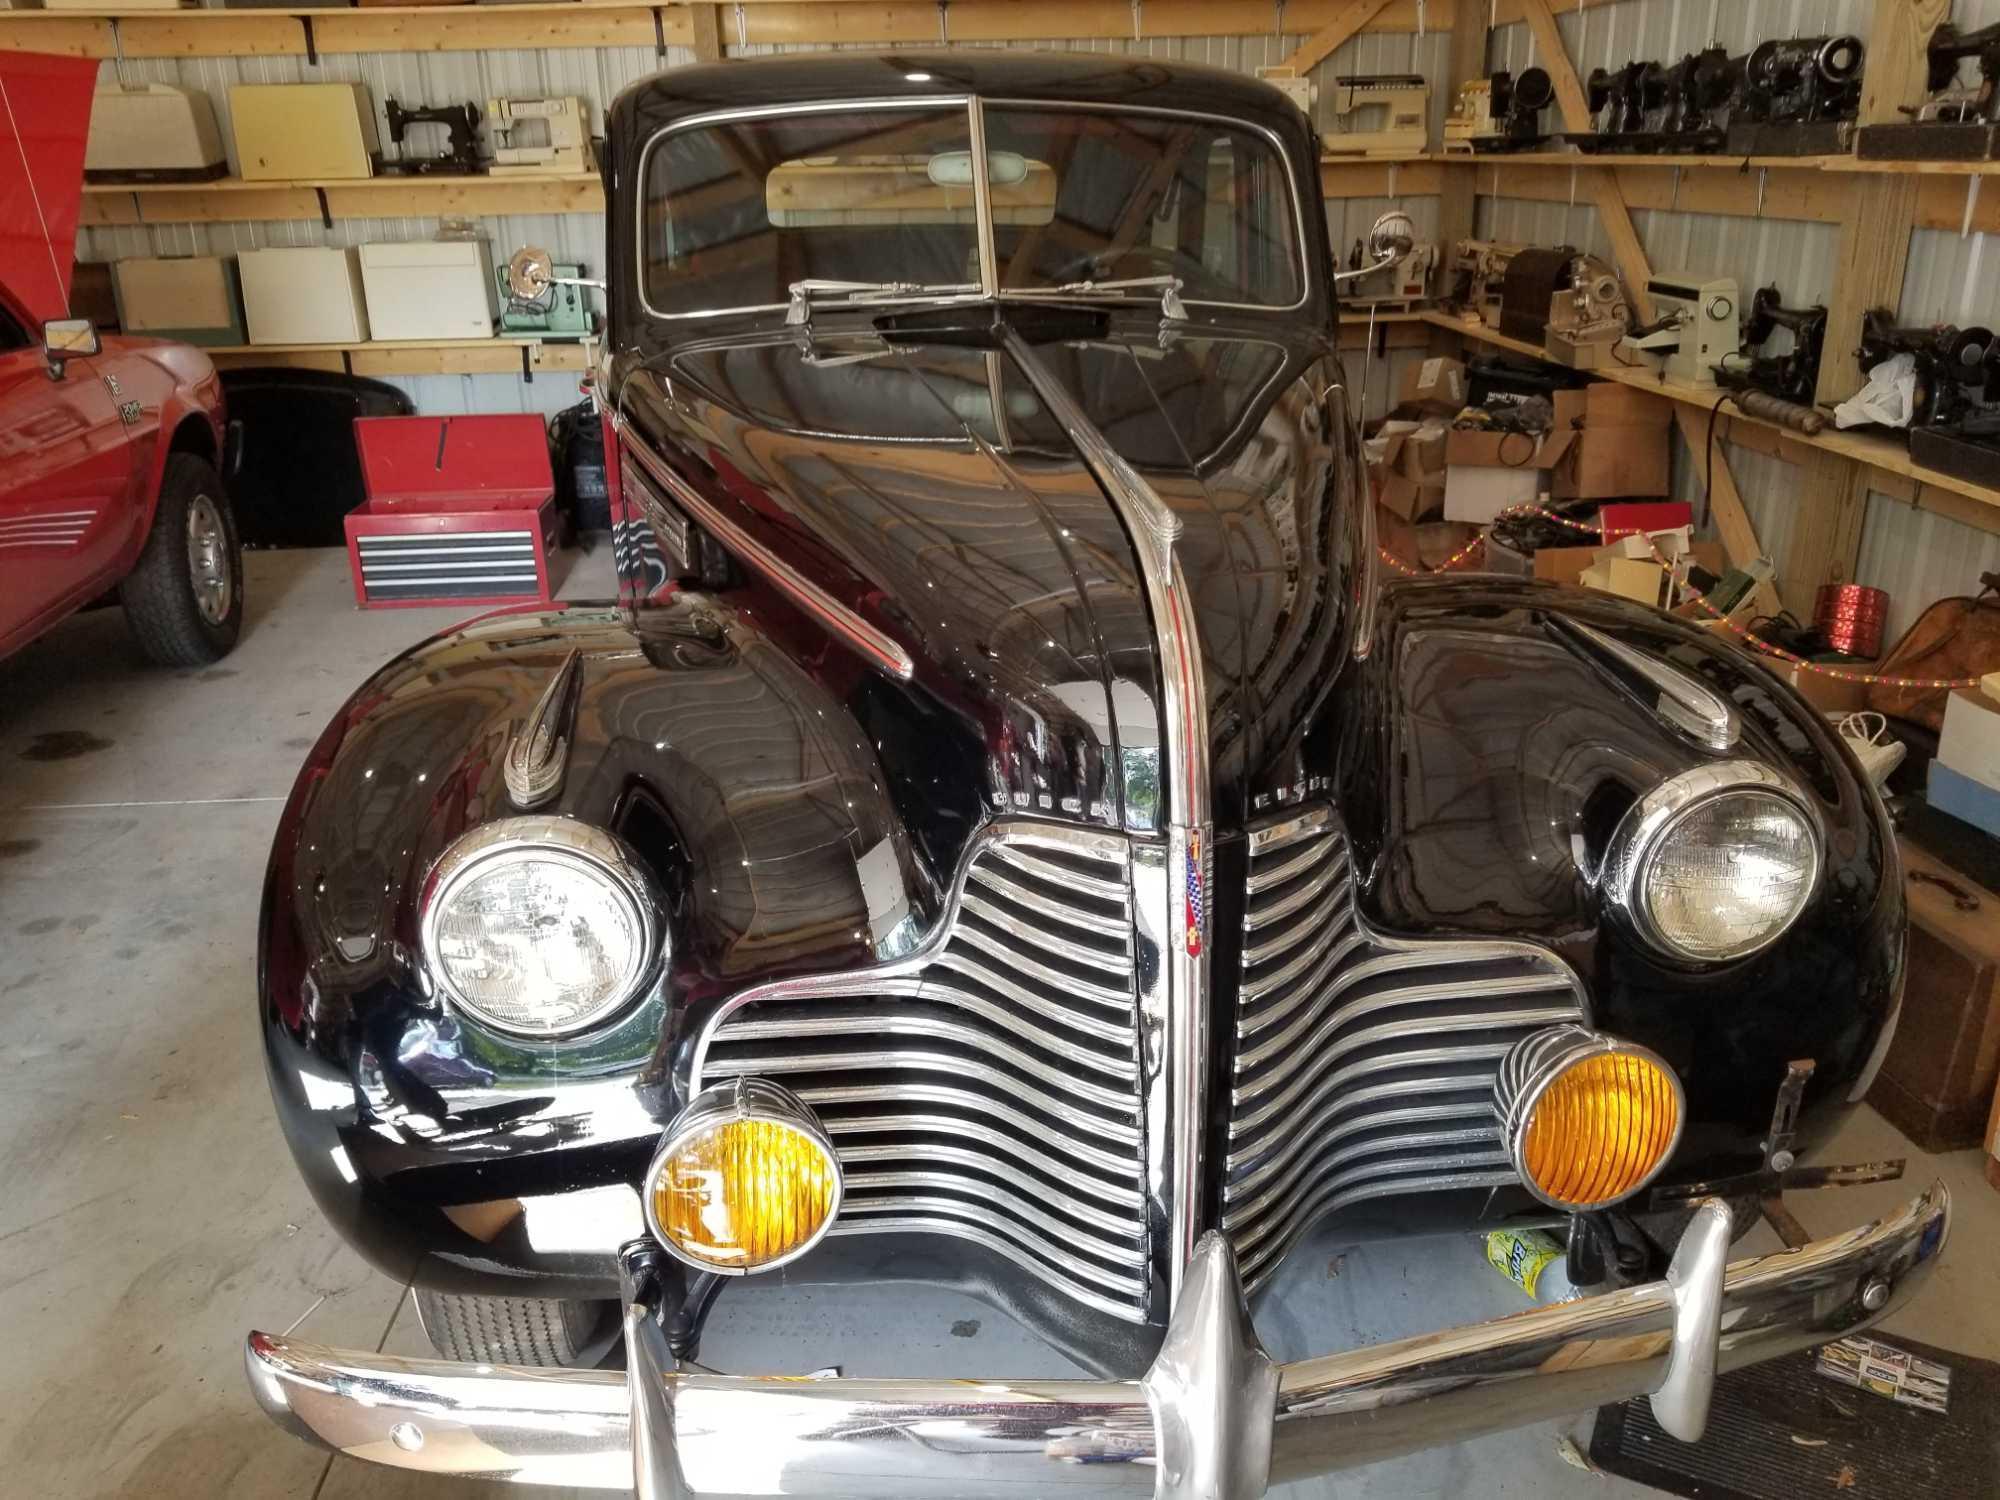 1940 Buick Special sedan, shows 96,201 miles, odom. discrepency, strait 8 cylinder, runs good